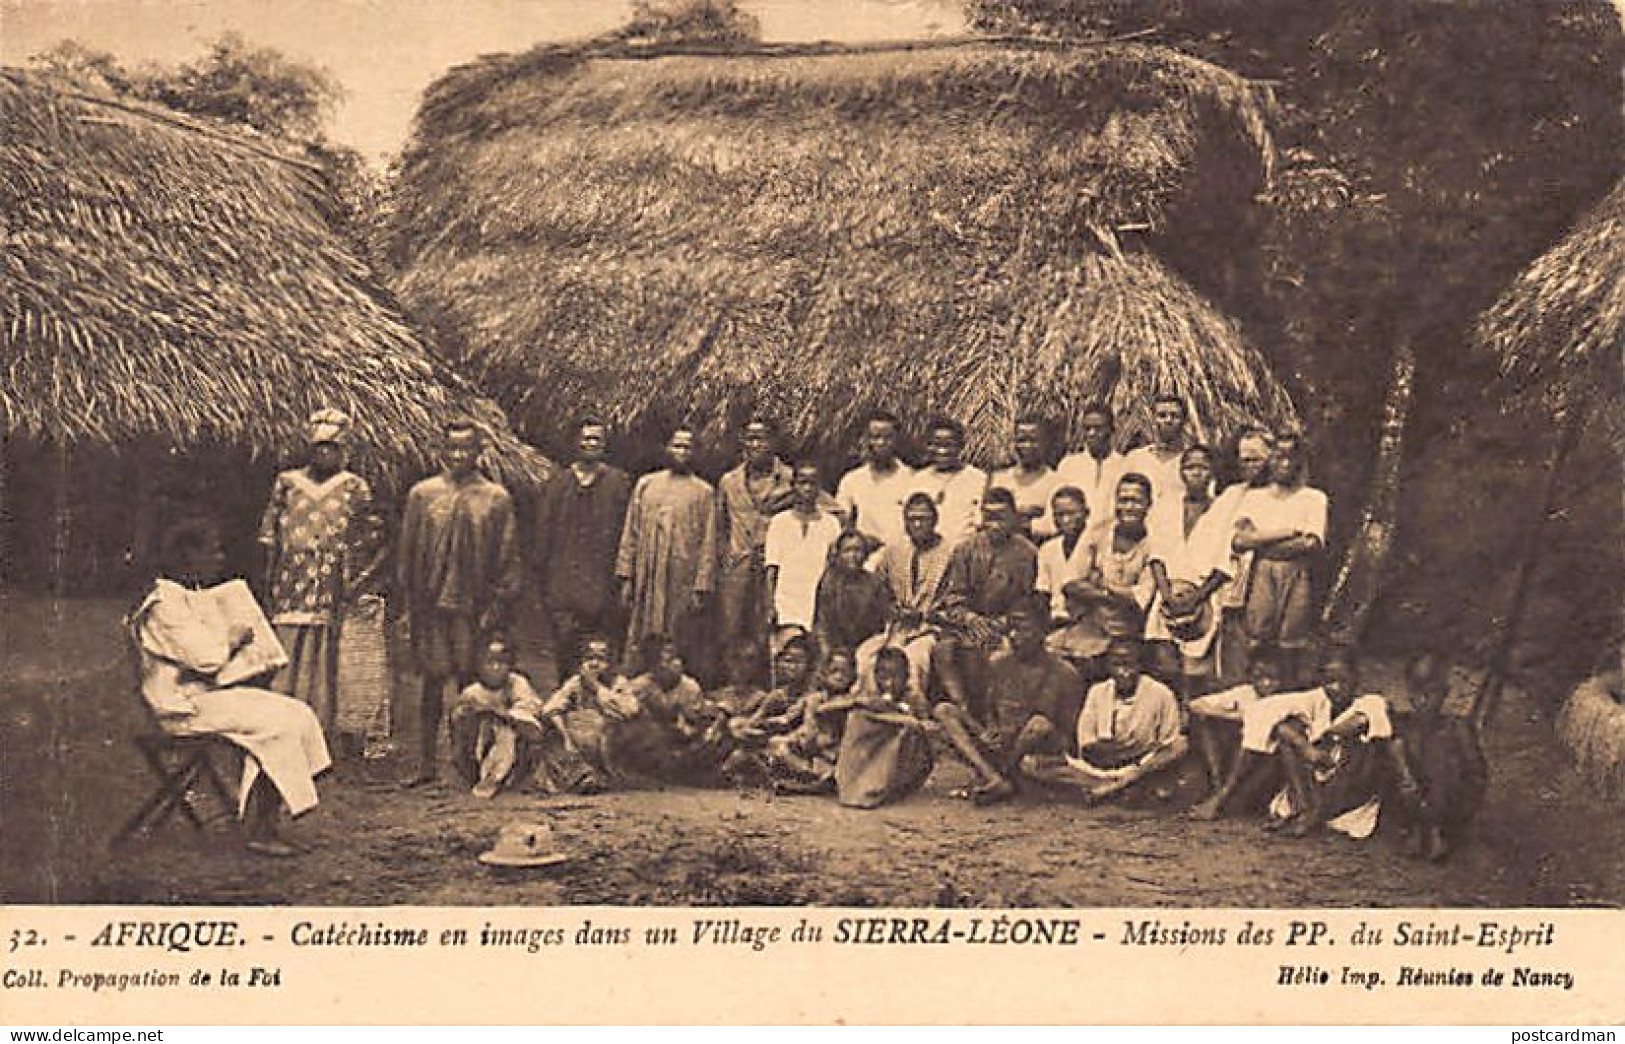 Sierra Leone - Catechism In Pictures In A Village - Missions Of The Fathers Of The Holy Spirit - Publ. Propagation De La - Sierra Leona